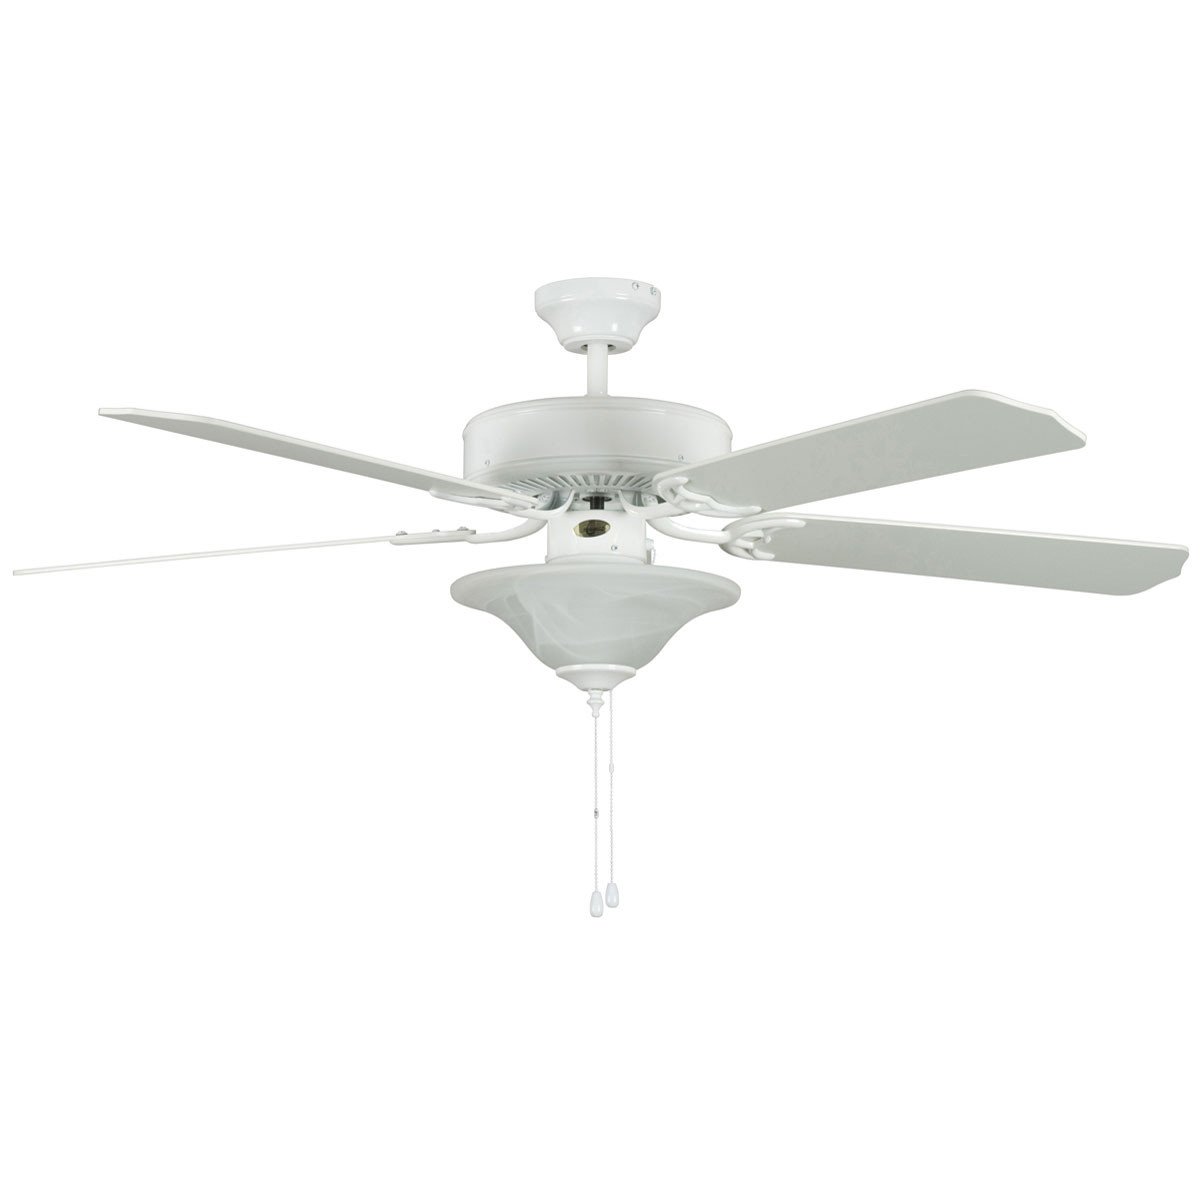 Concord Fans 52" Heritage Square White Ceiling Fan with Light Kit